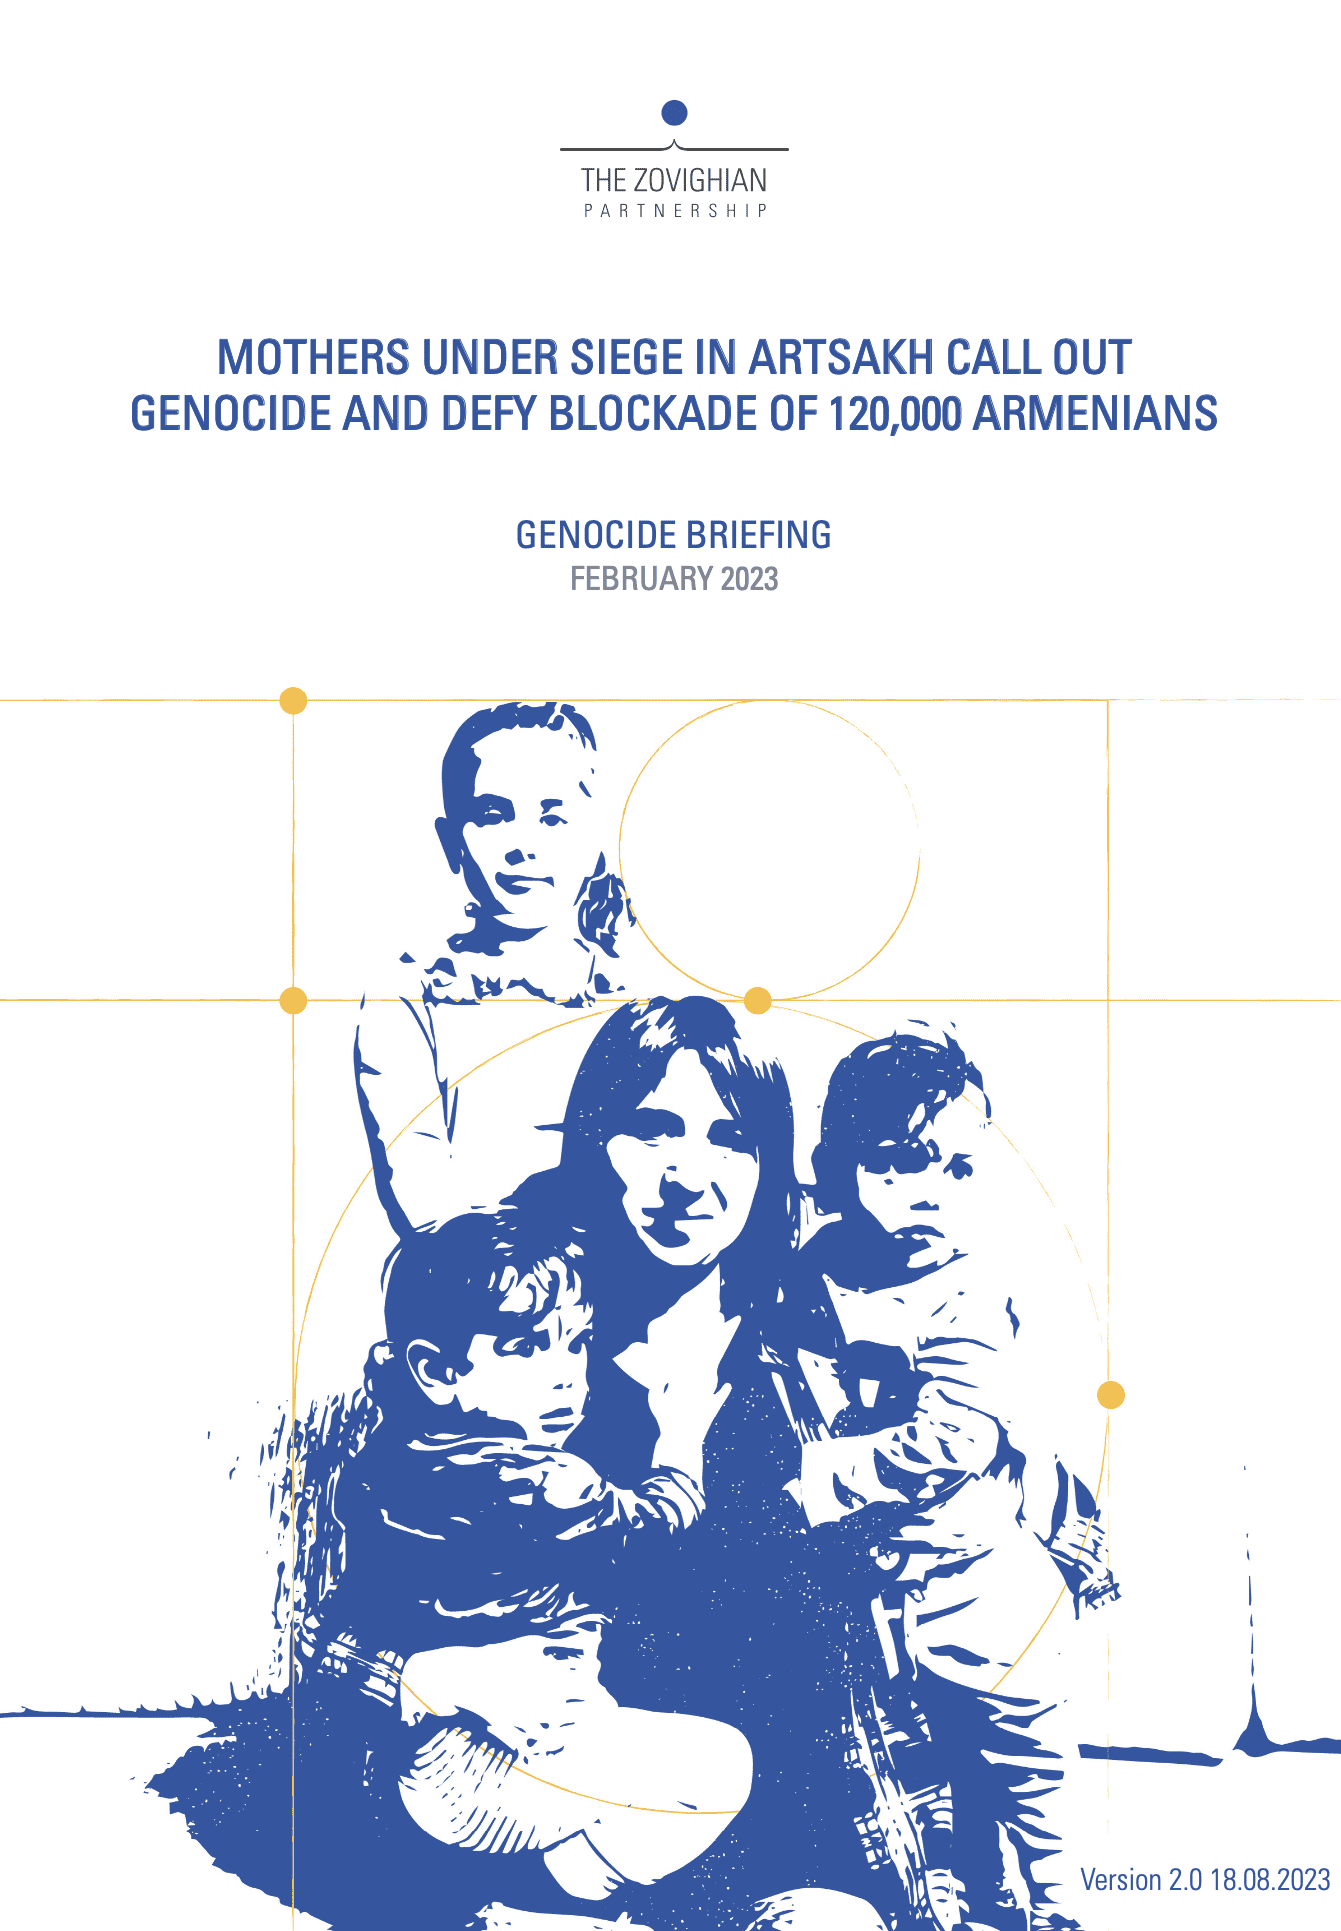 Cover screenshot of report depicting a graphic illustration of a woman with her 3 children in Artsakh